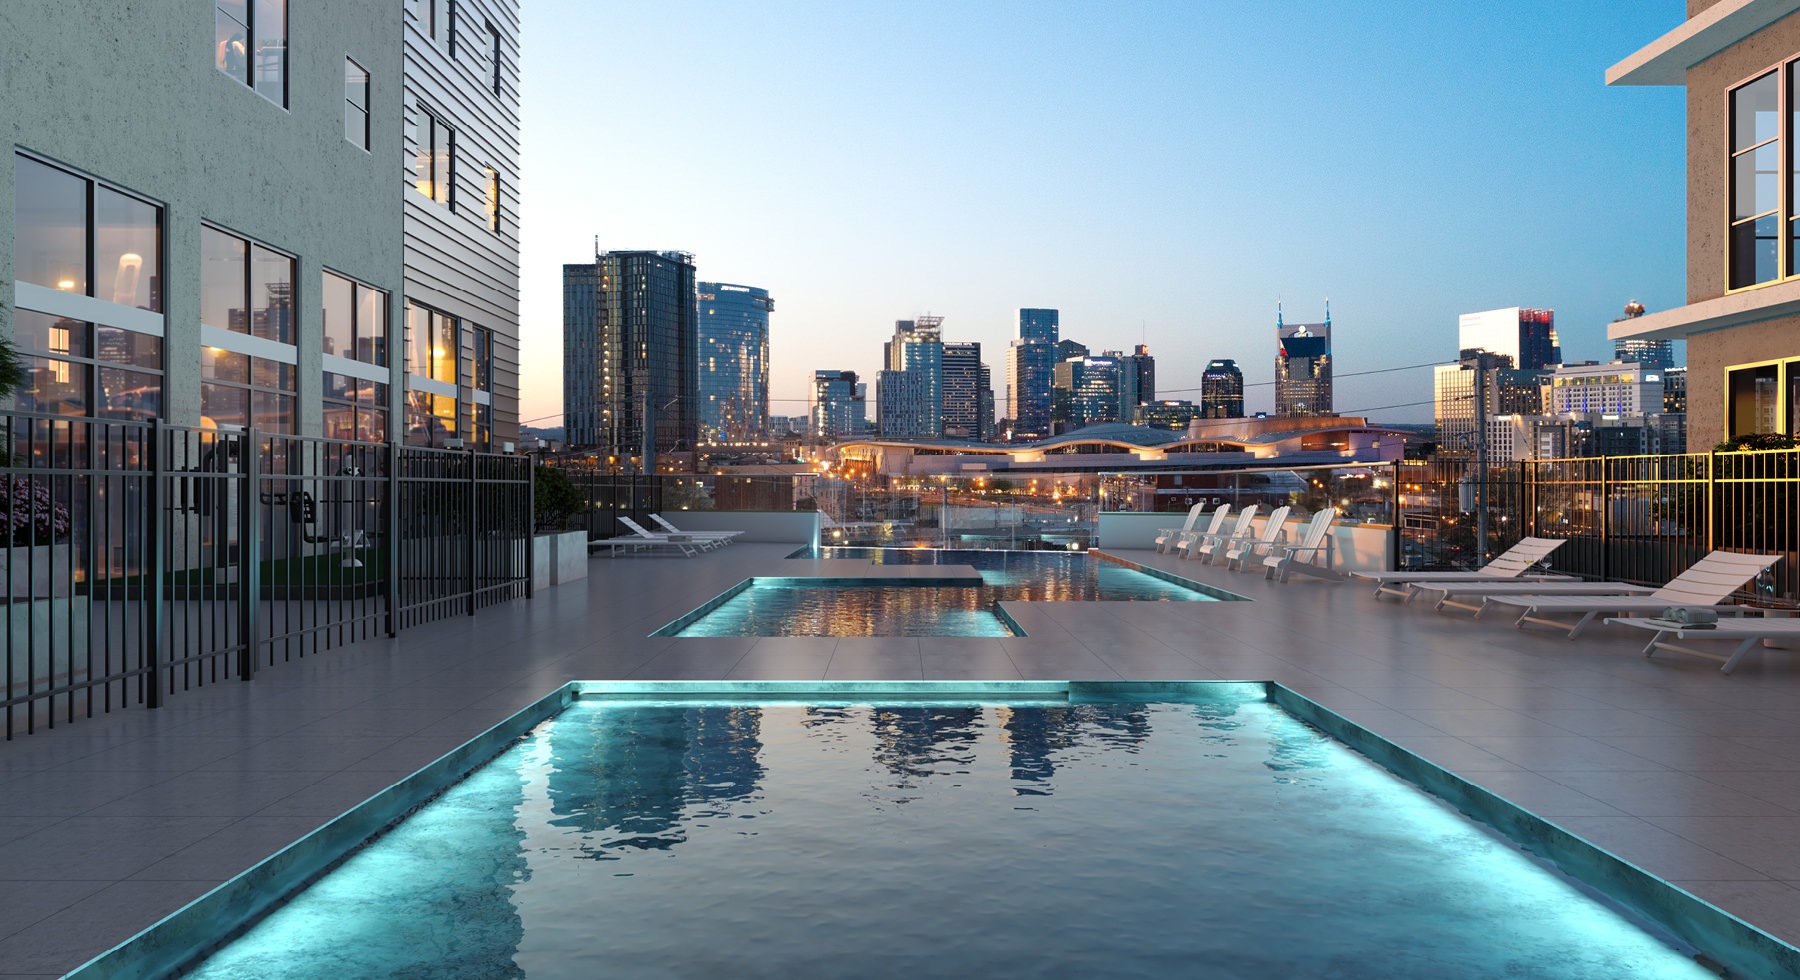 Pools leading down property with city views